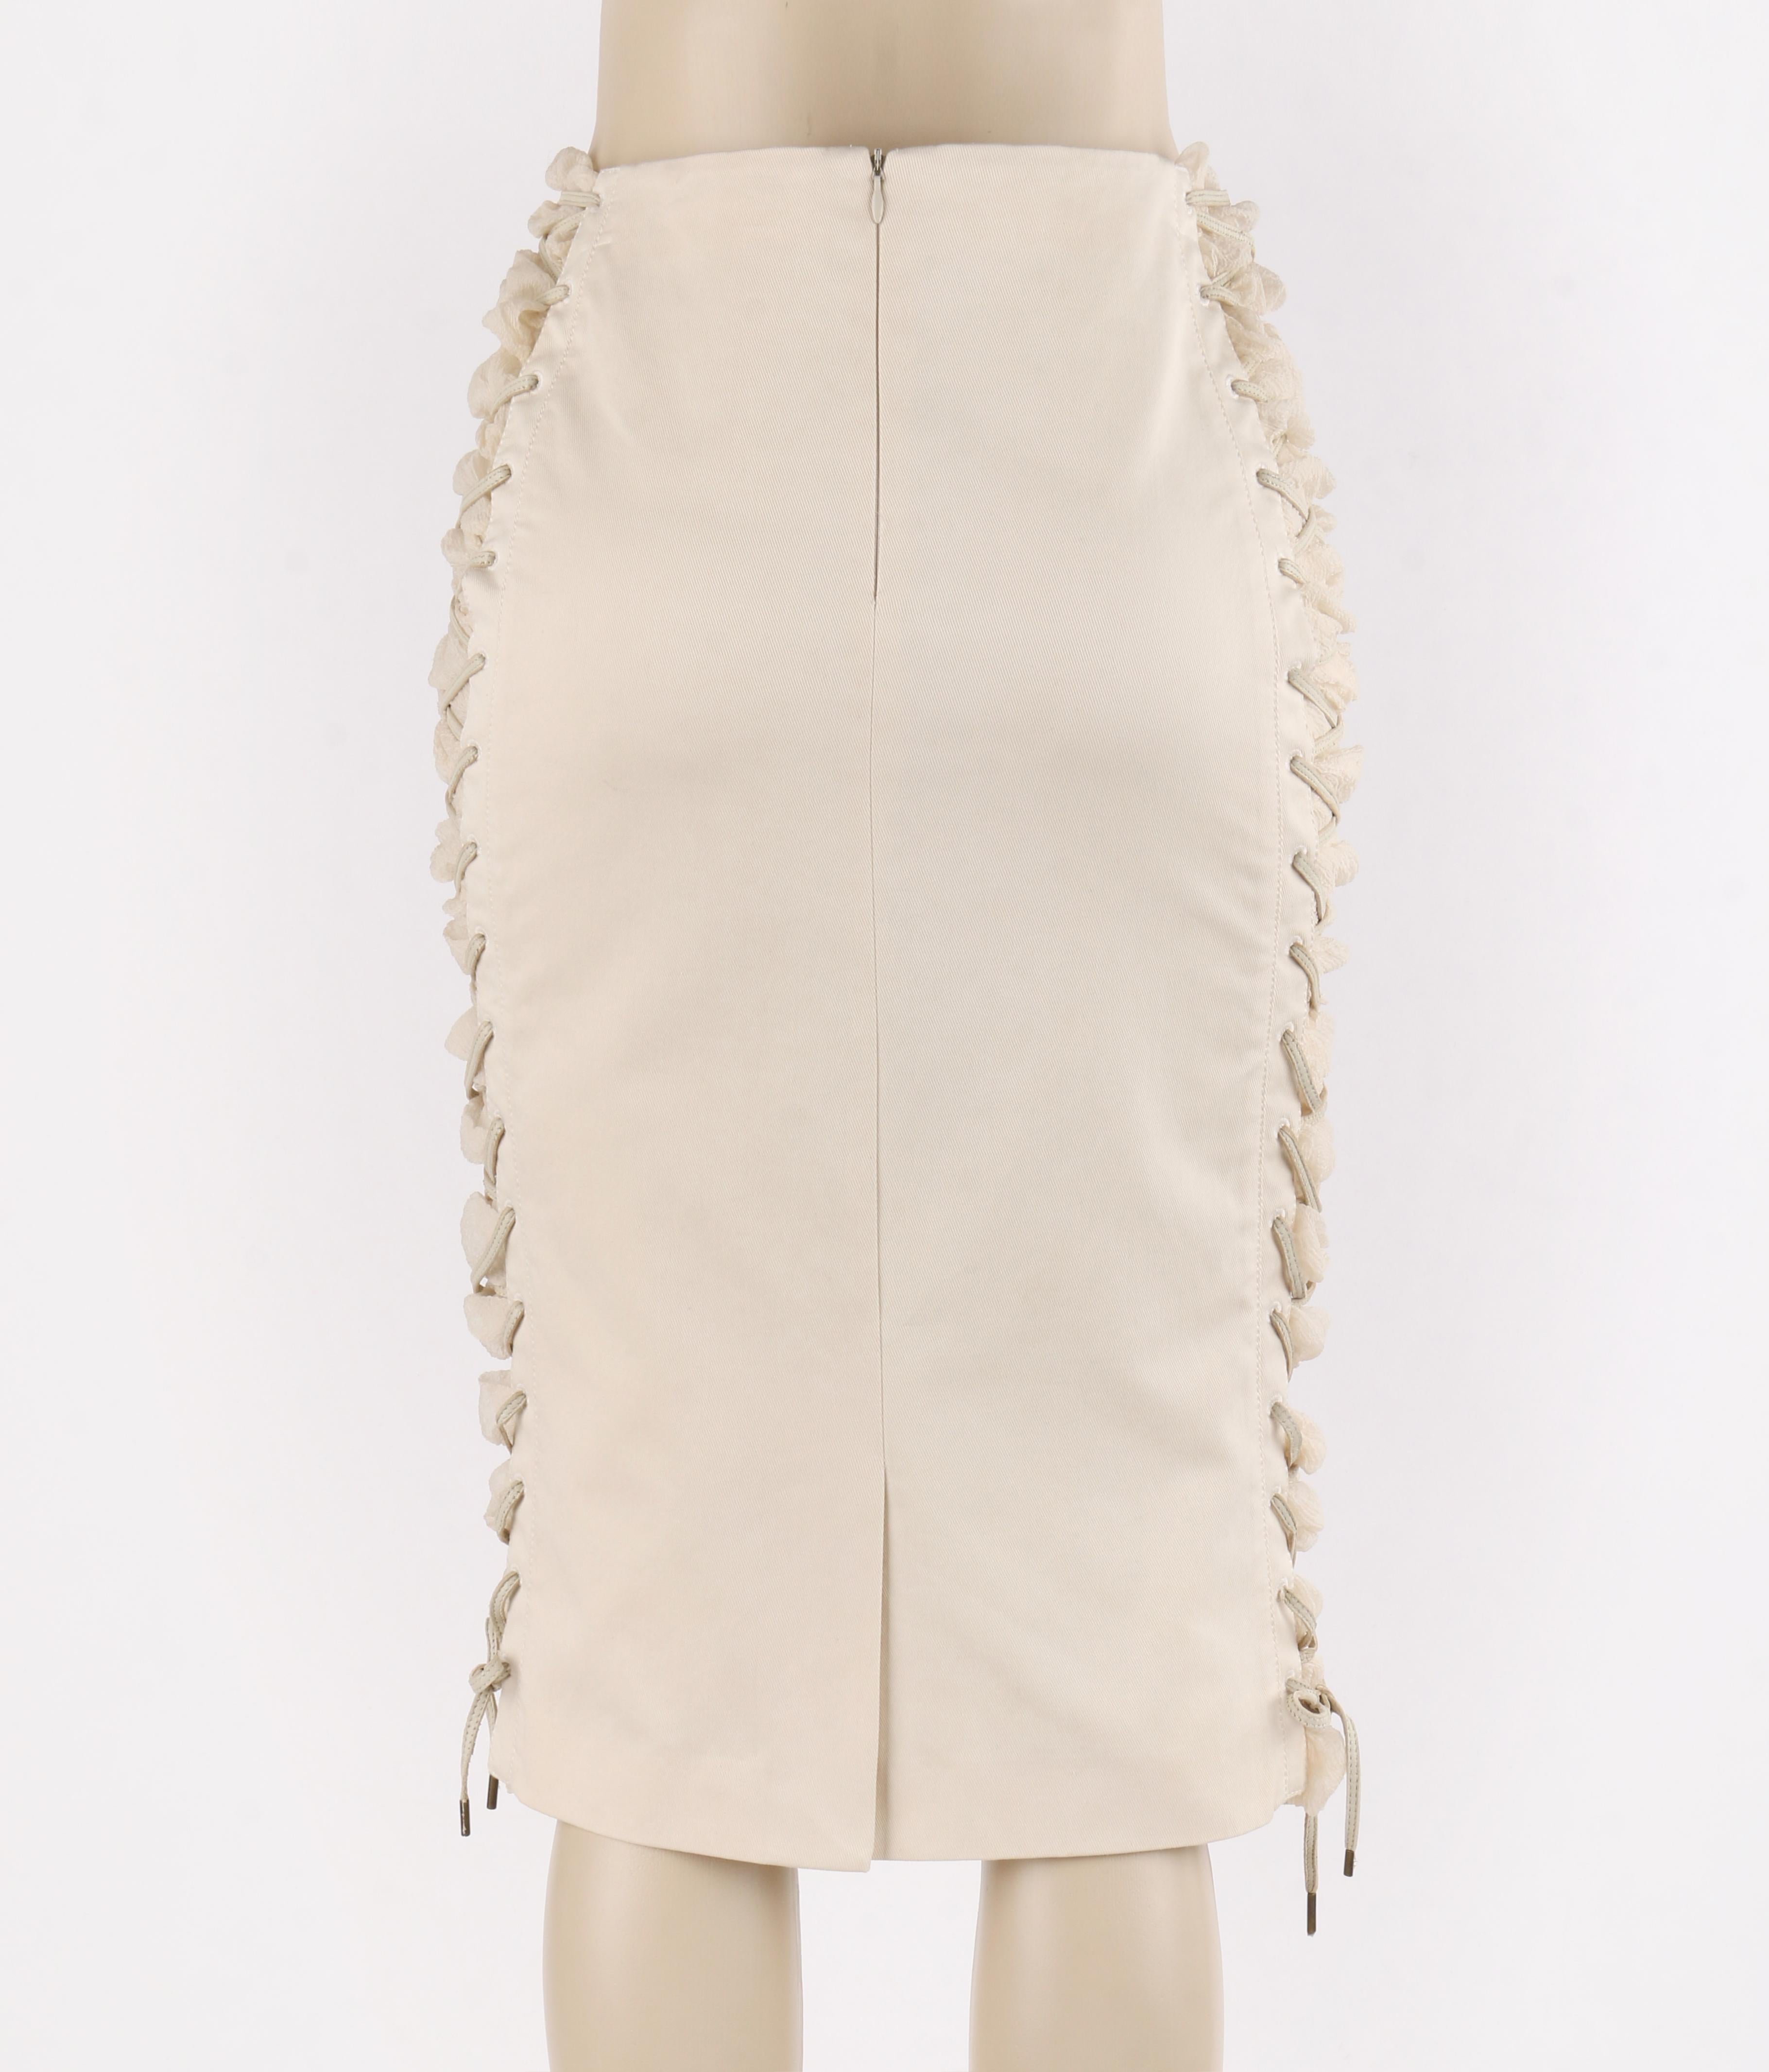 Beige ALEXANDER McQUEEN A/W 2002 “Supercalifragilistic” Silk Lace Up Pencil Skirt For Sale